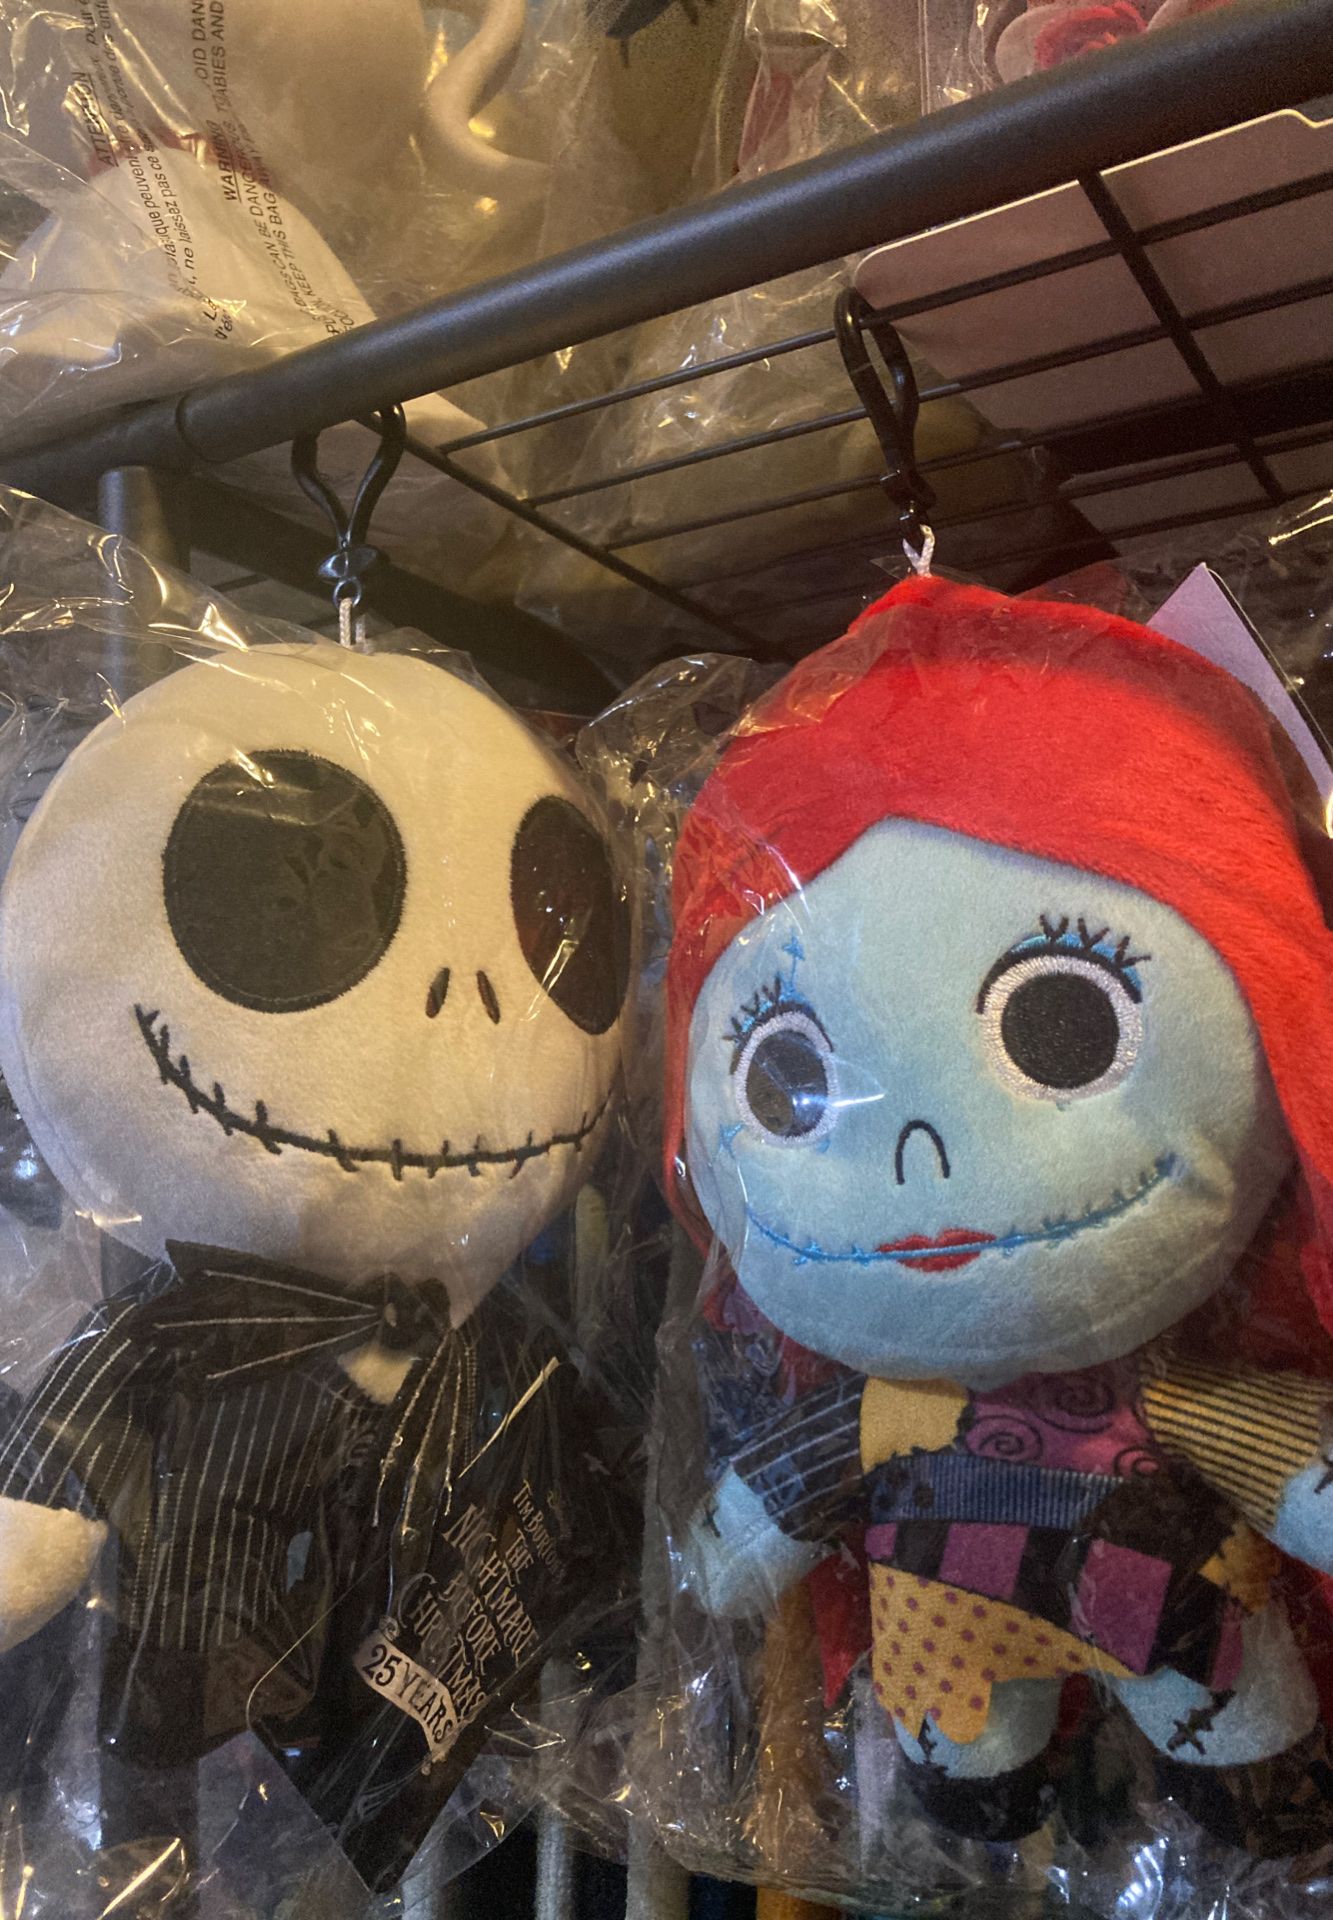 Nightmare before Christmas 8” tall plush coin holder key chains